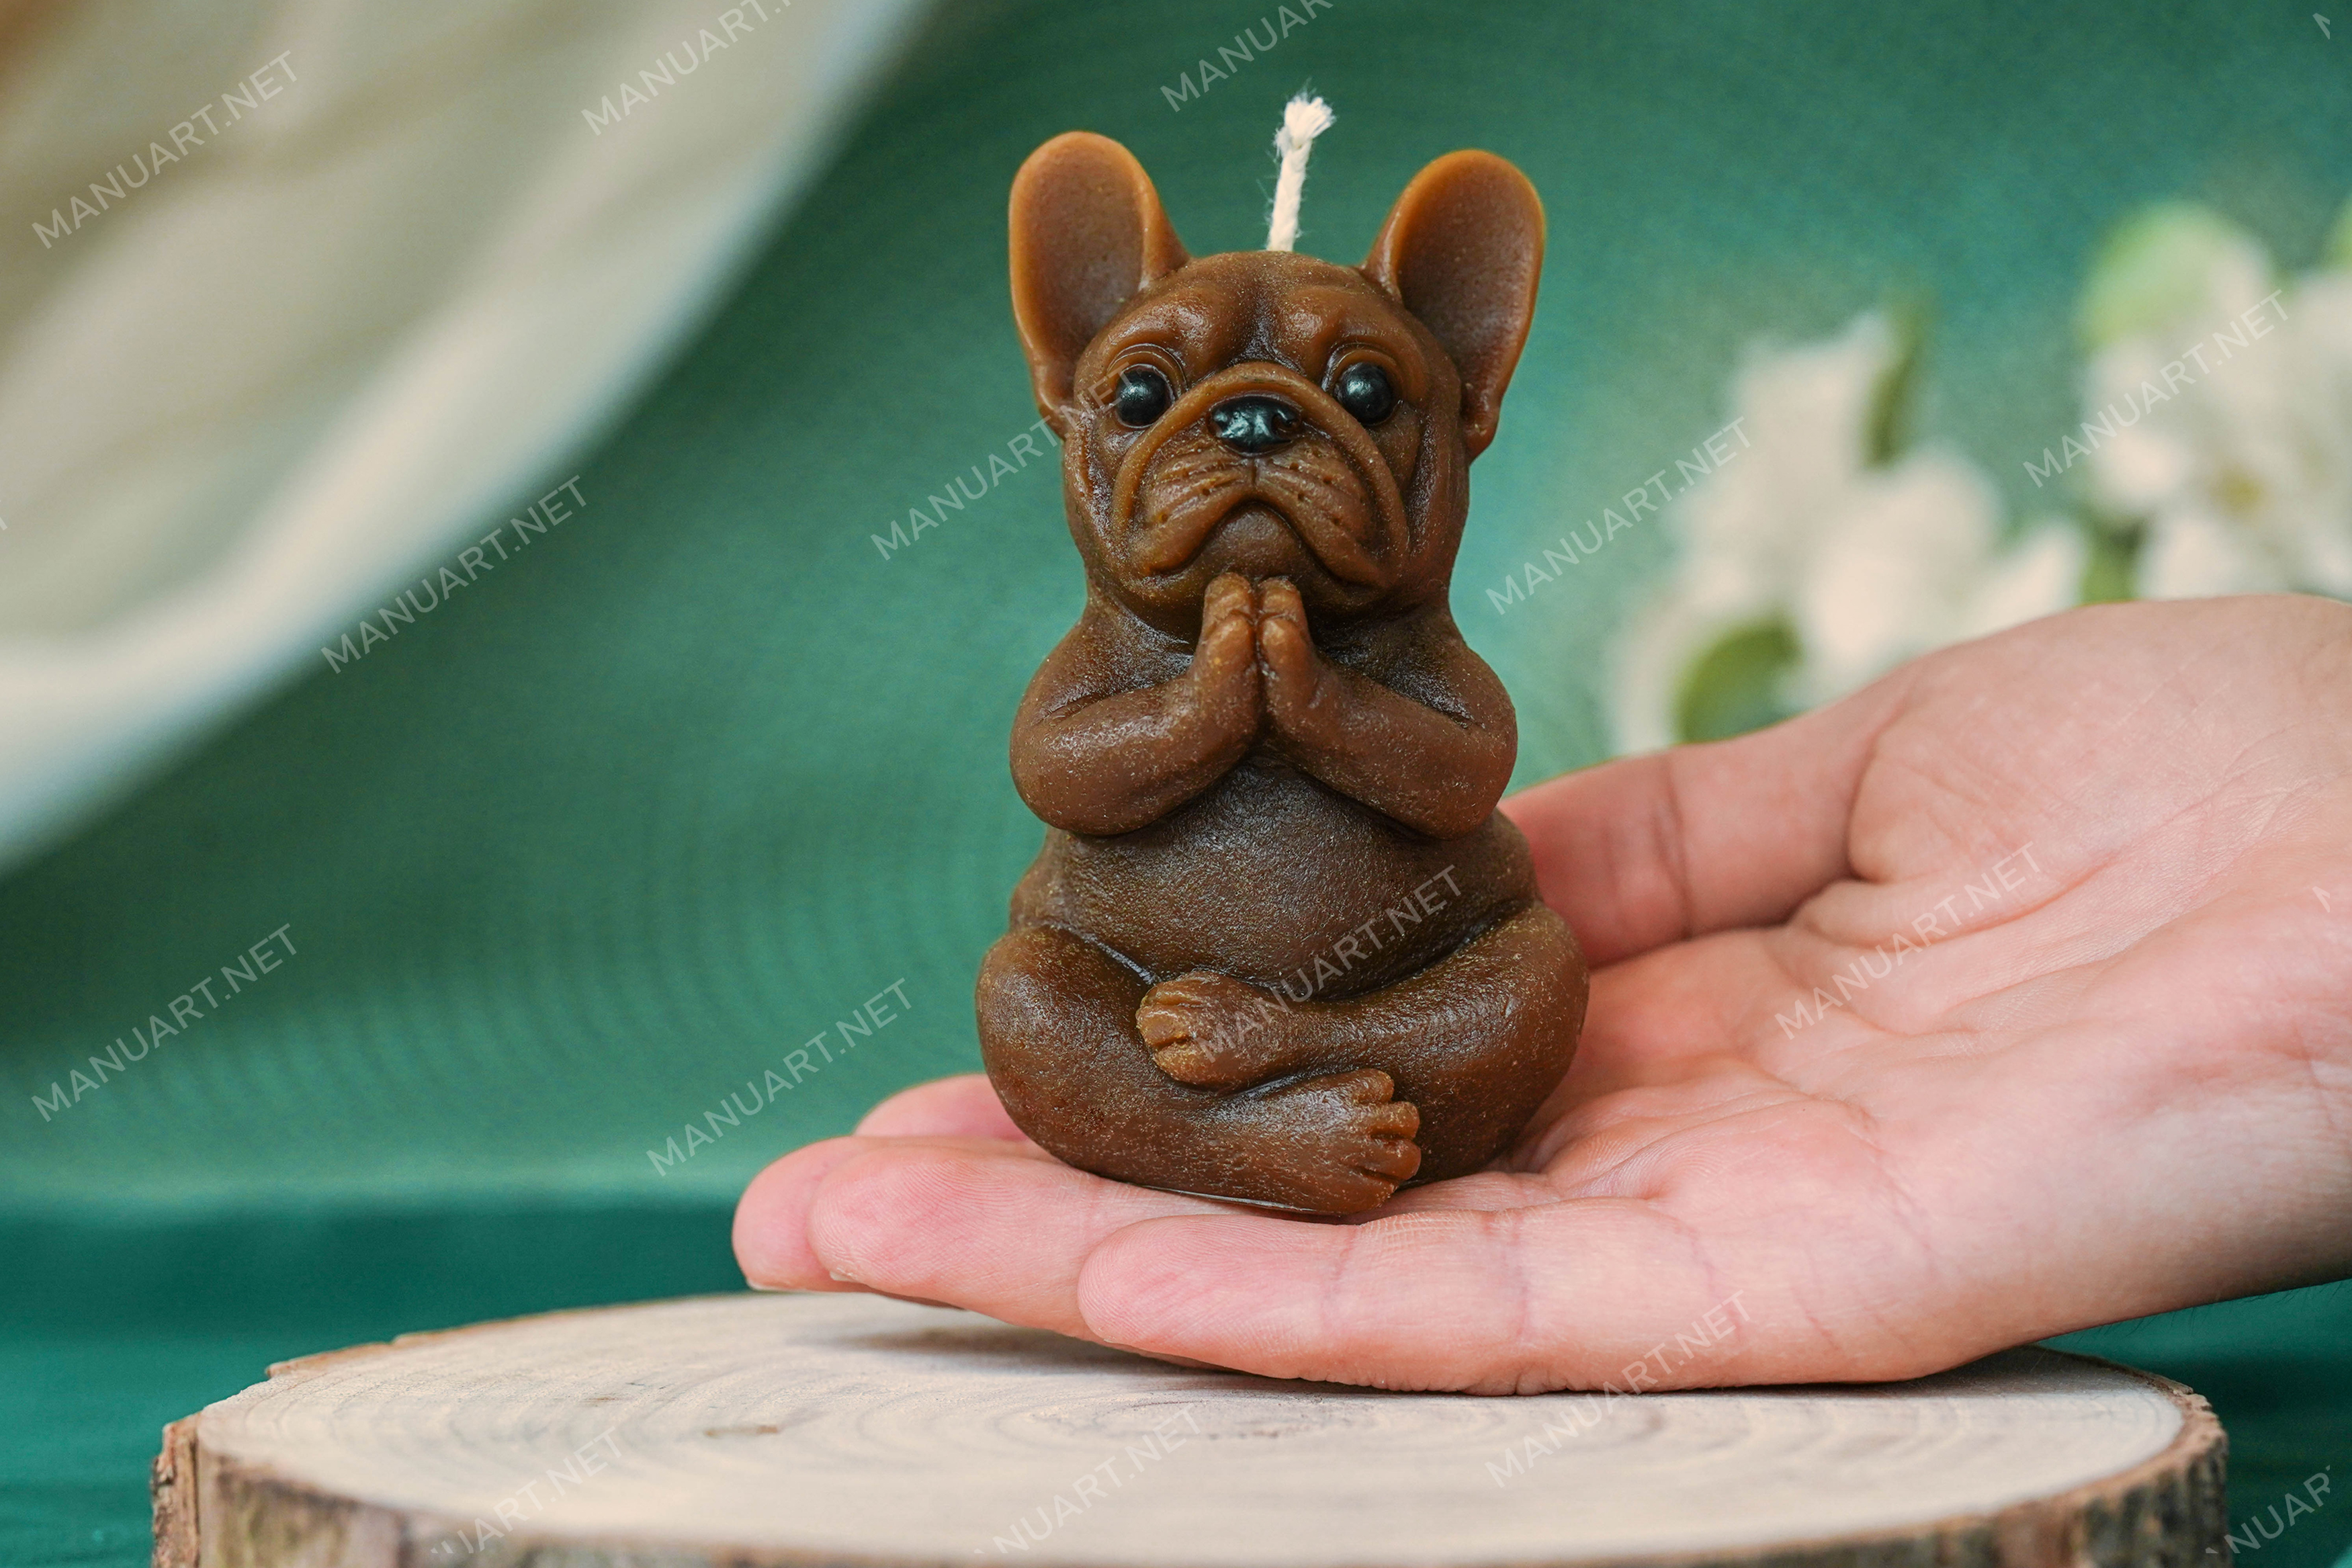 Review of the Le Dogue Silicone Molds - A Walk with Bernie